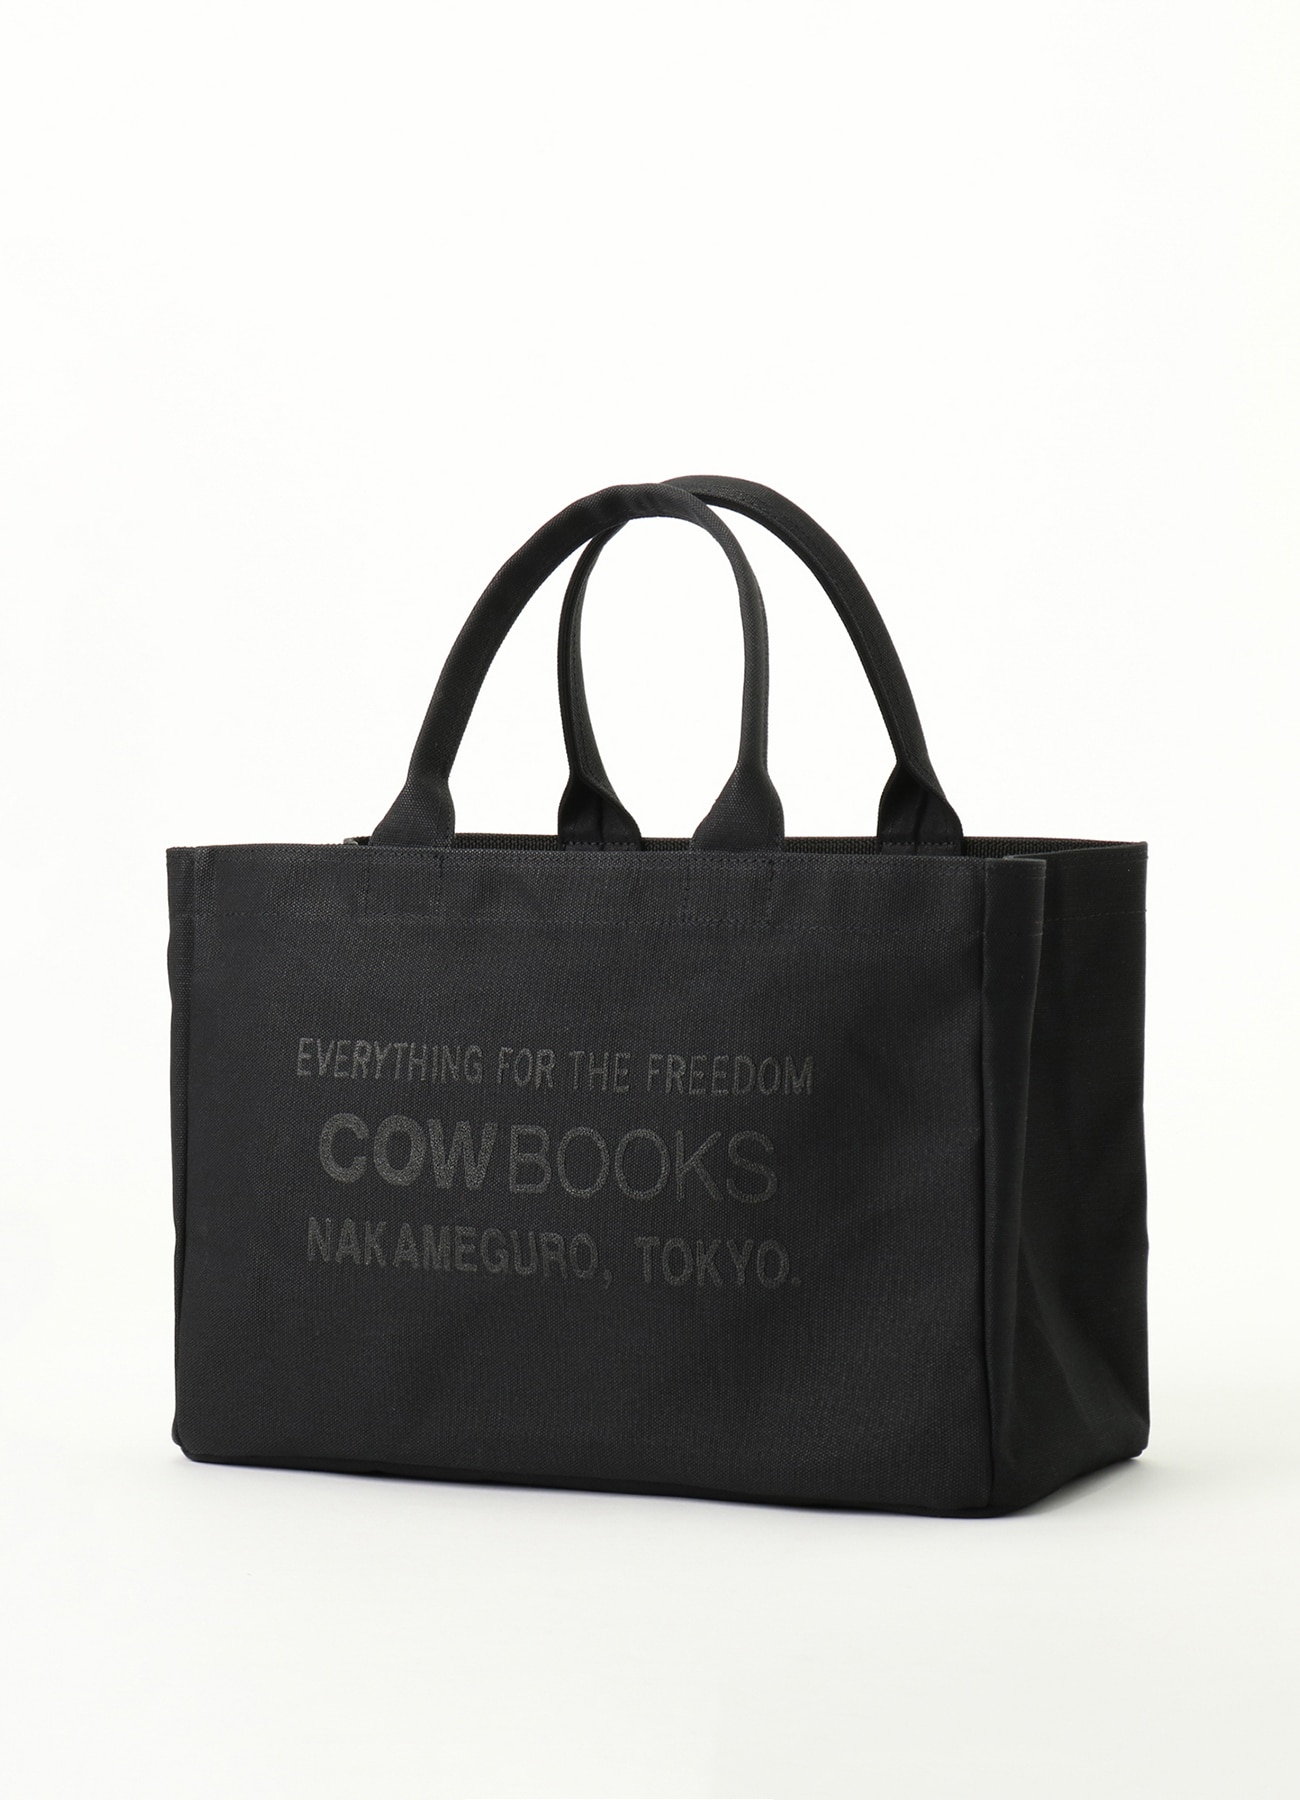 WILDSIDE × COW BOOKS Tote Bag (Small)